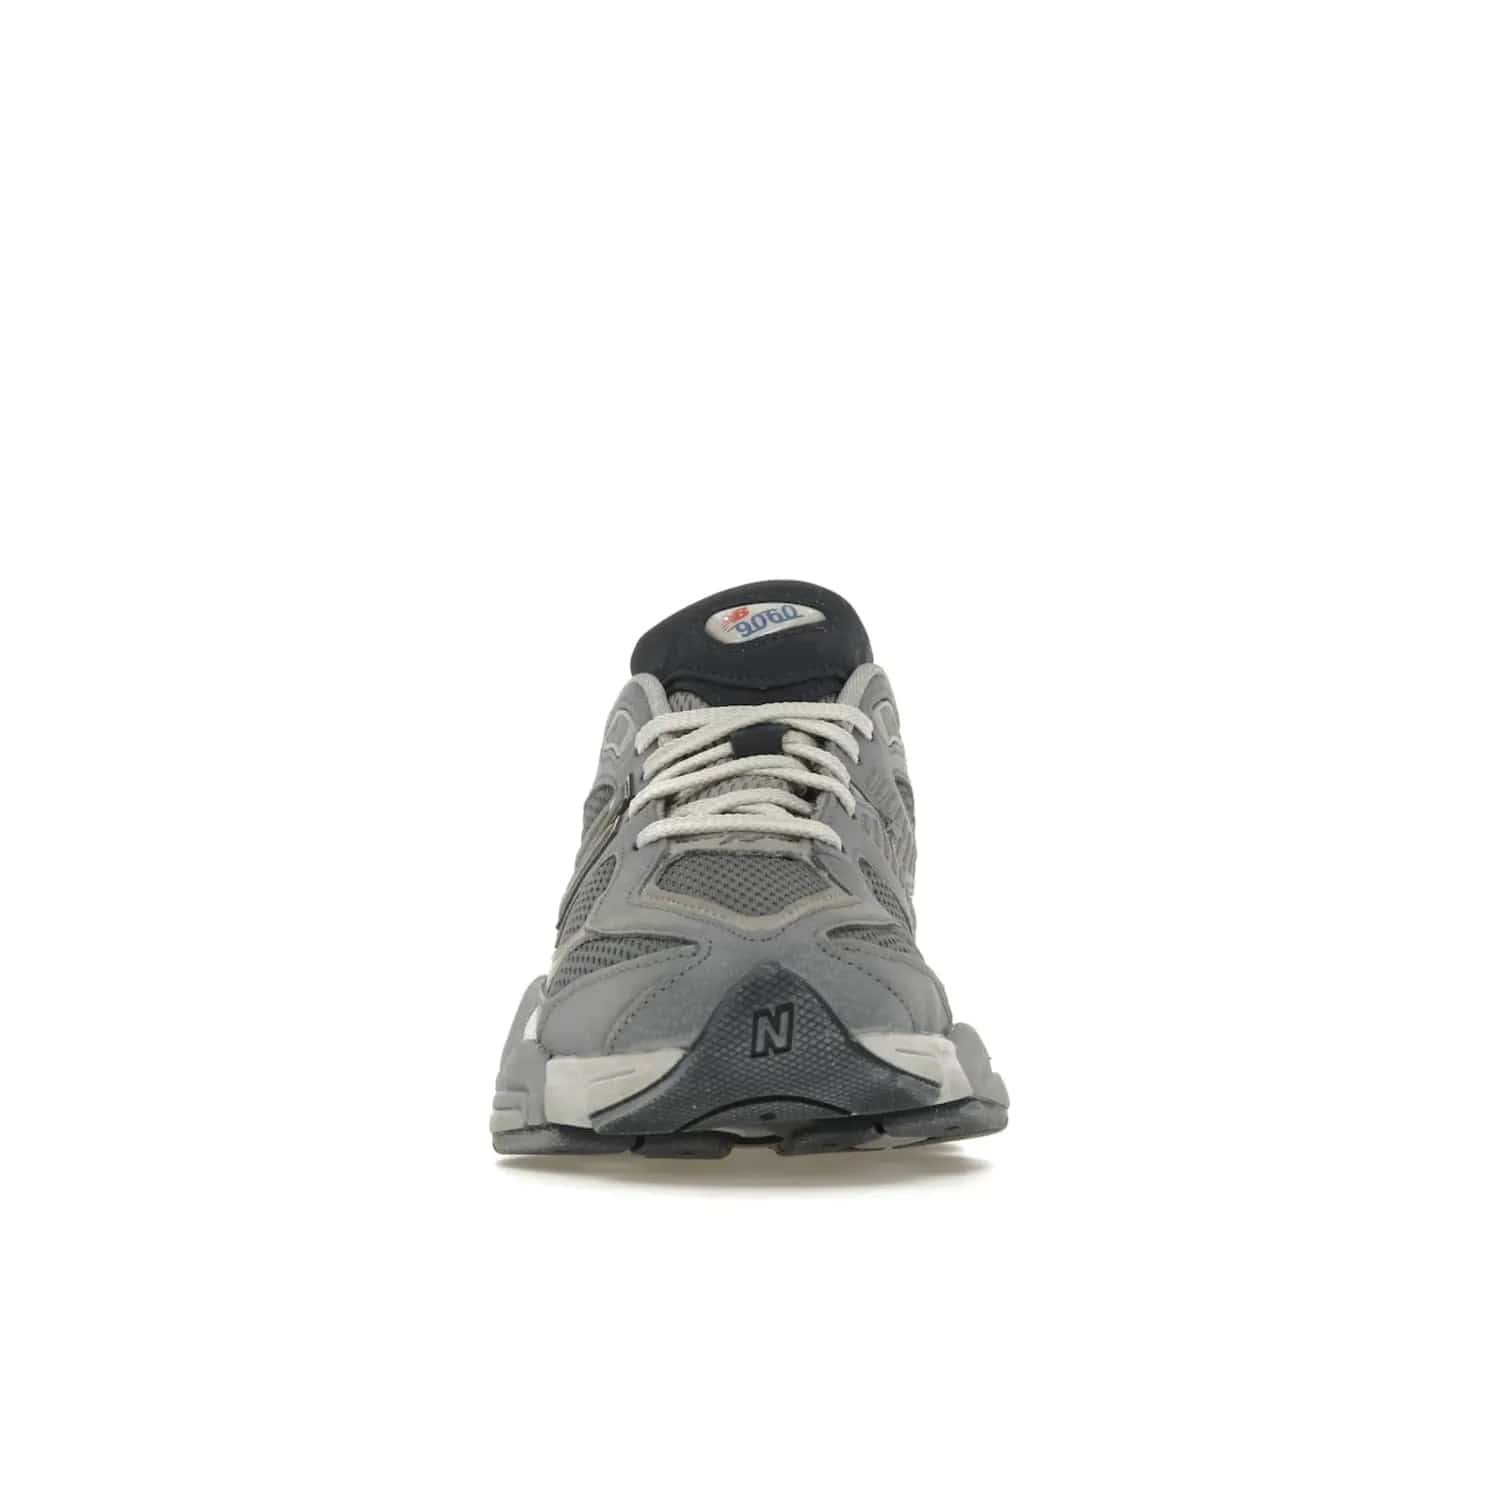 New Balance 9060 Grey Day (2023) - Image 10 - Only at www.BallersClubKickz.com - #
Sporty-meets-stylish in the New Balance 9060 Grey Day sneaker. Designed with Arctic Grey, Steel, and Silver Metallic, it offers an edgy but wearable look along with classic NB comfort and quality.